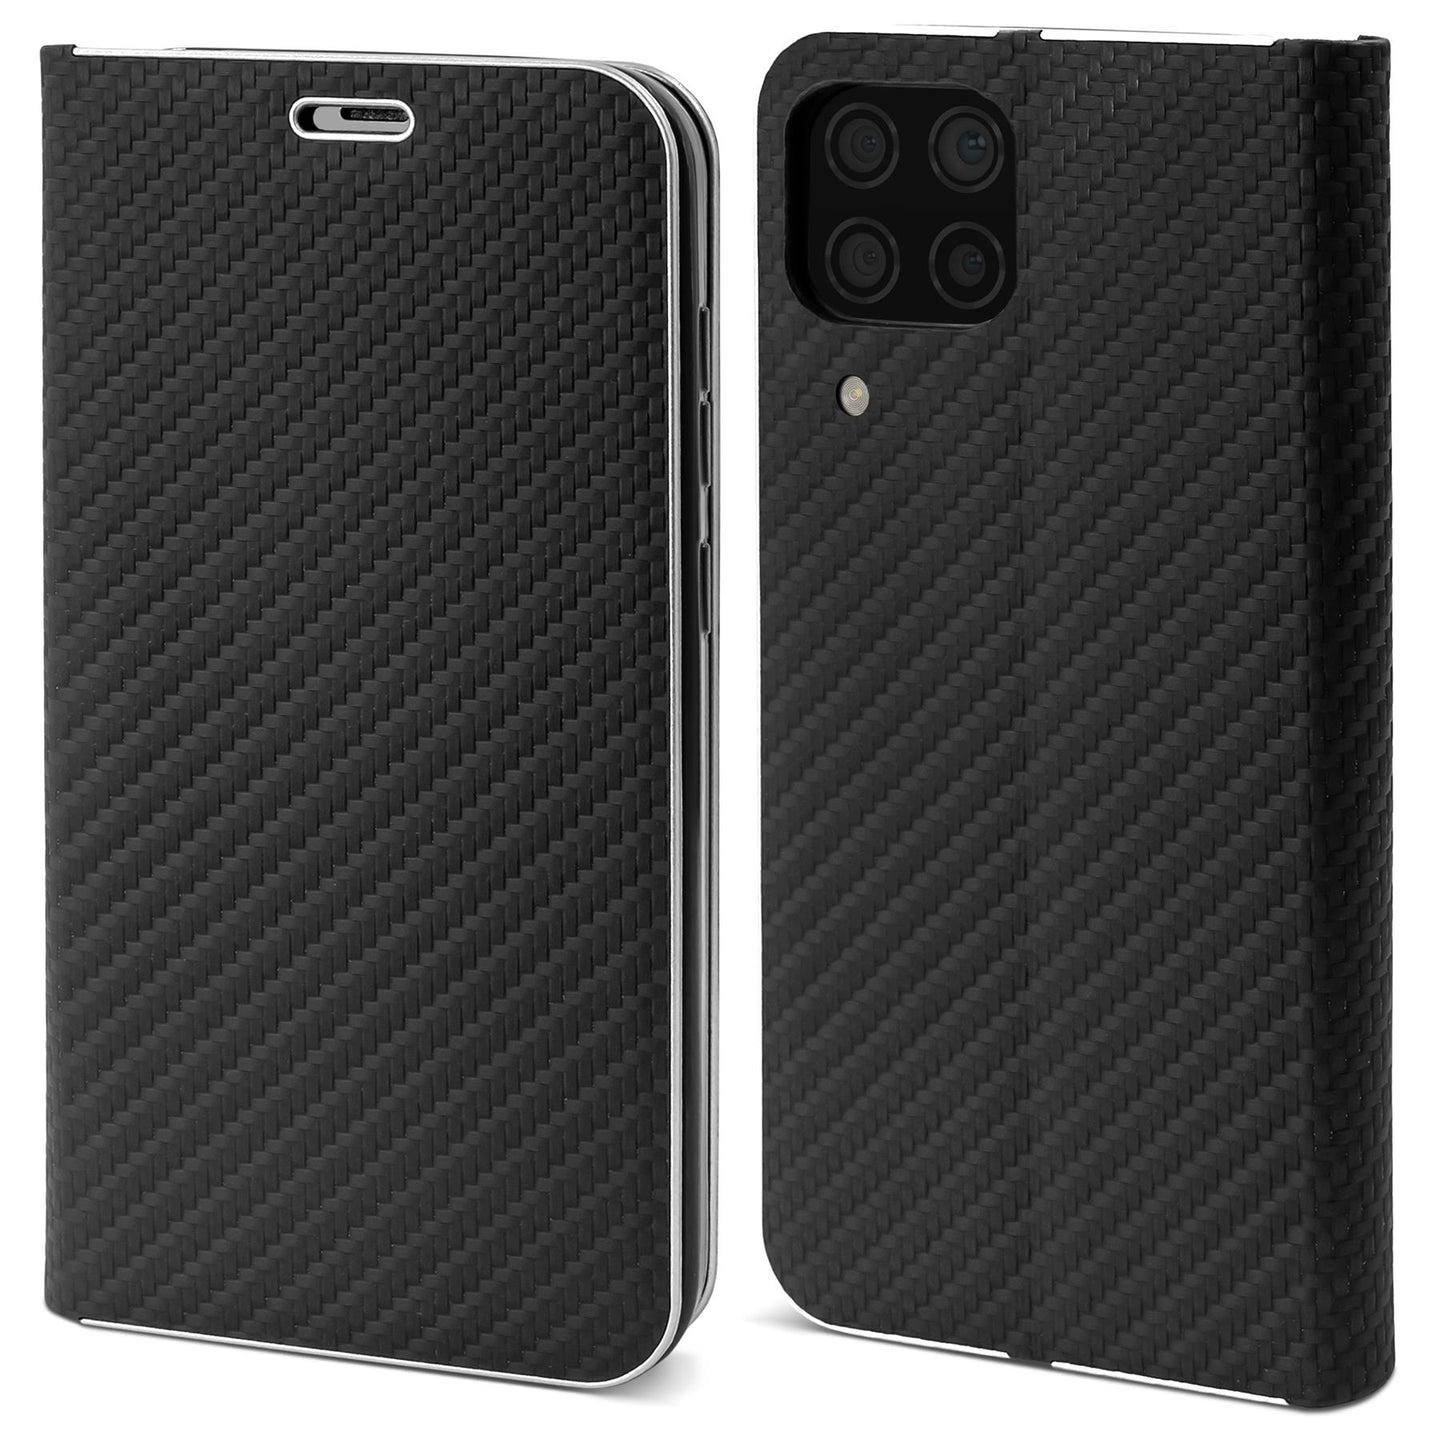 Moozy Wallet Case for Huawei P40 Lite, Black Carbon – Metallic Edge Protection Magnetic Closure Flip Cover with Card Holder